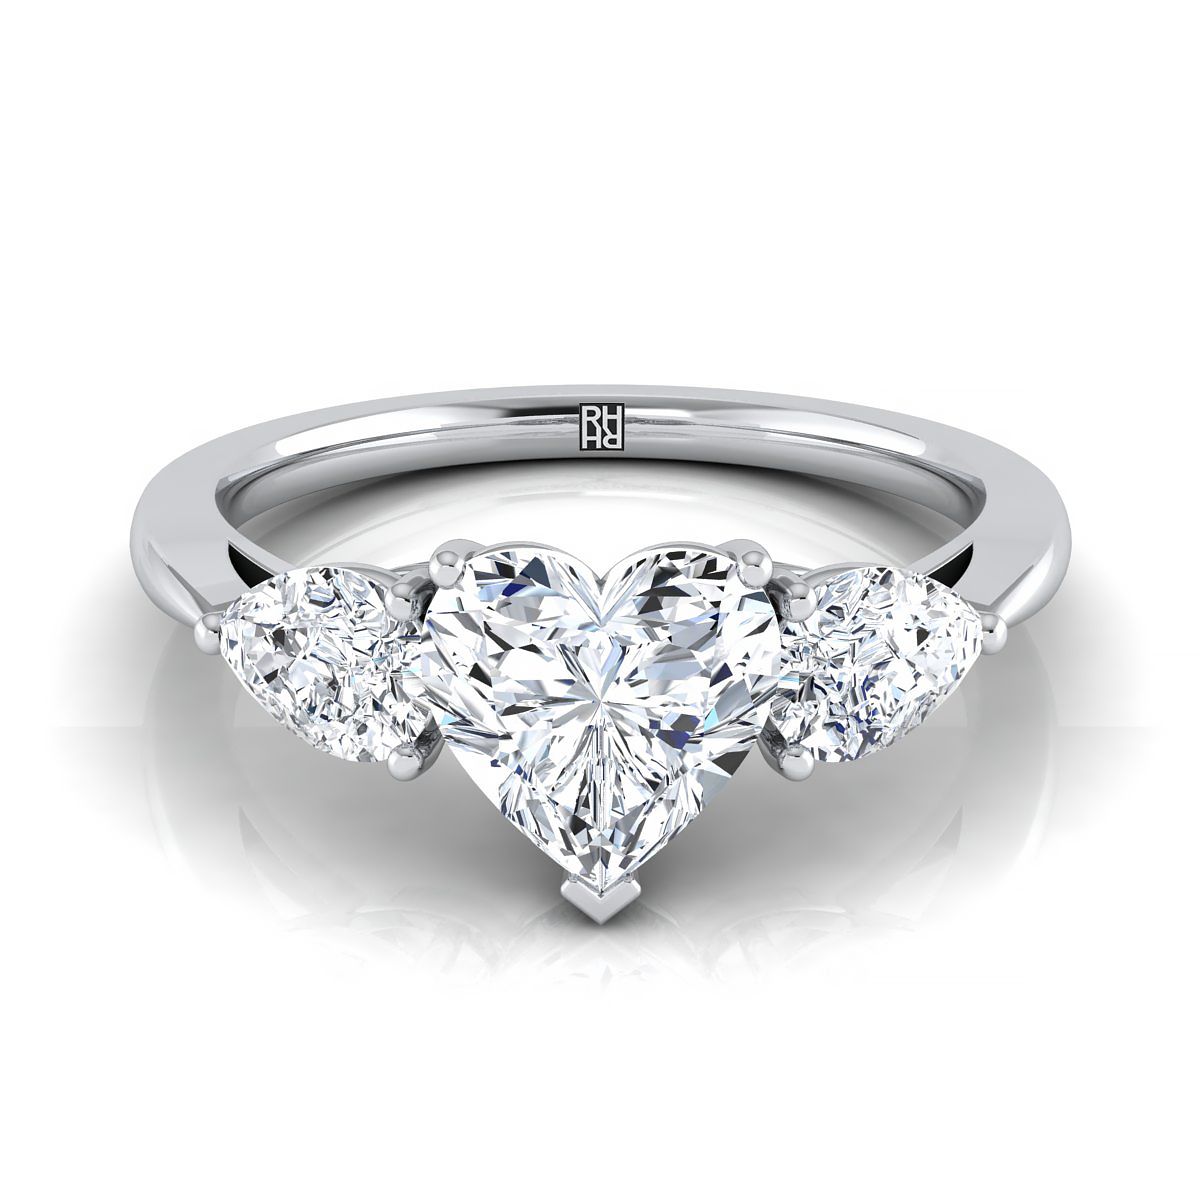 18K White Gold Heart Shape Center Diamond Perfectly Matched Pear Shaped Three Diamond Engagement Ring -7/8ctw